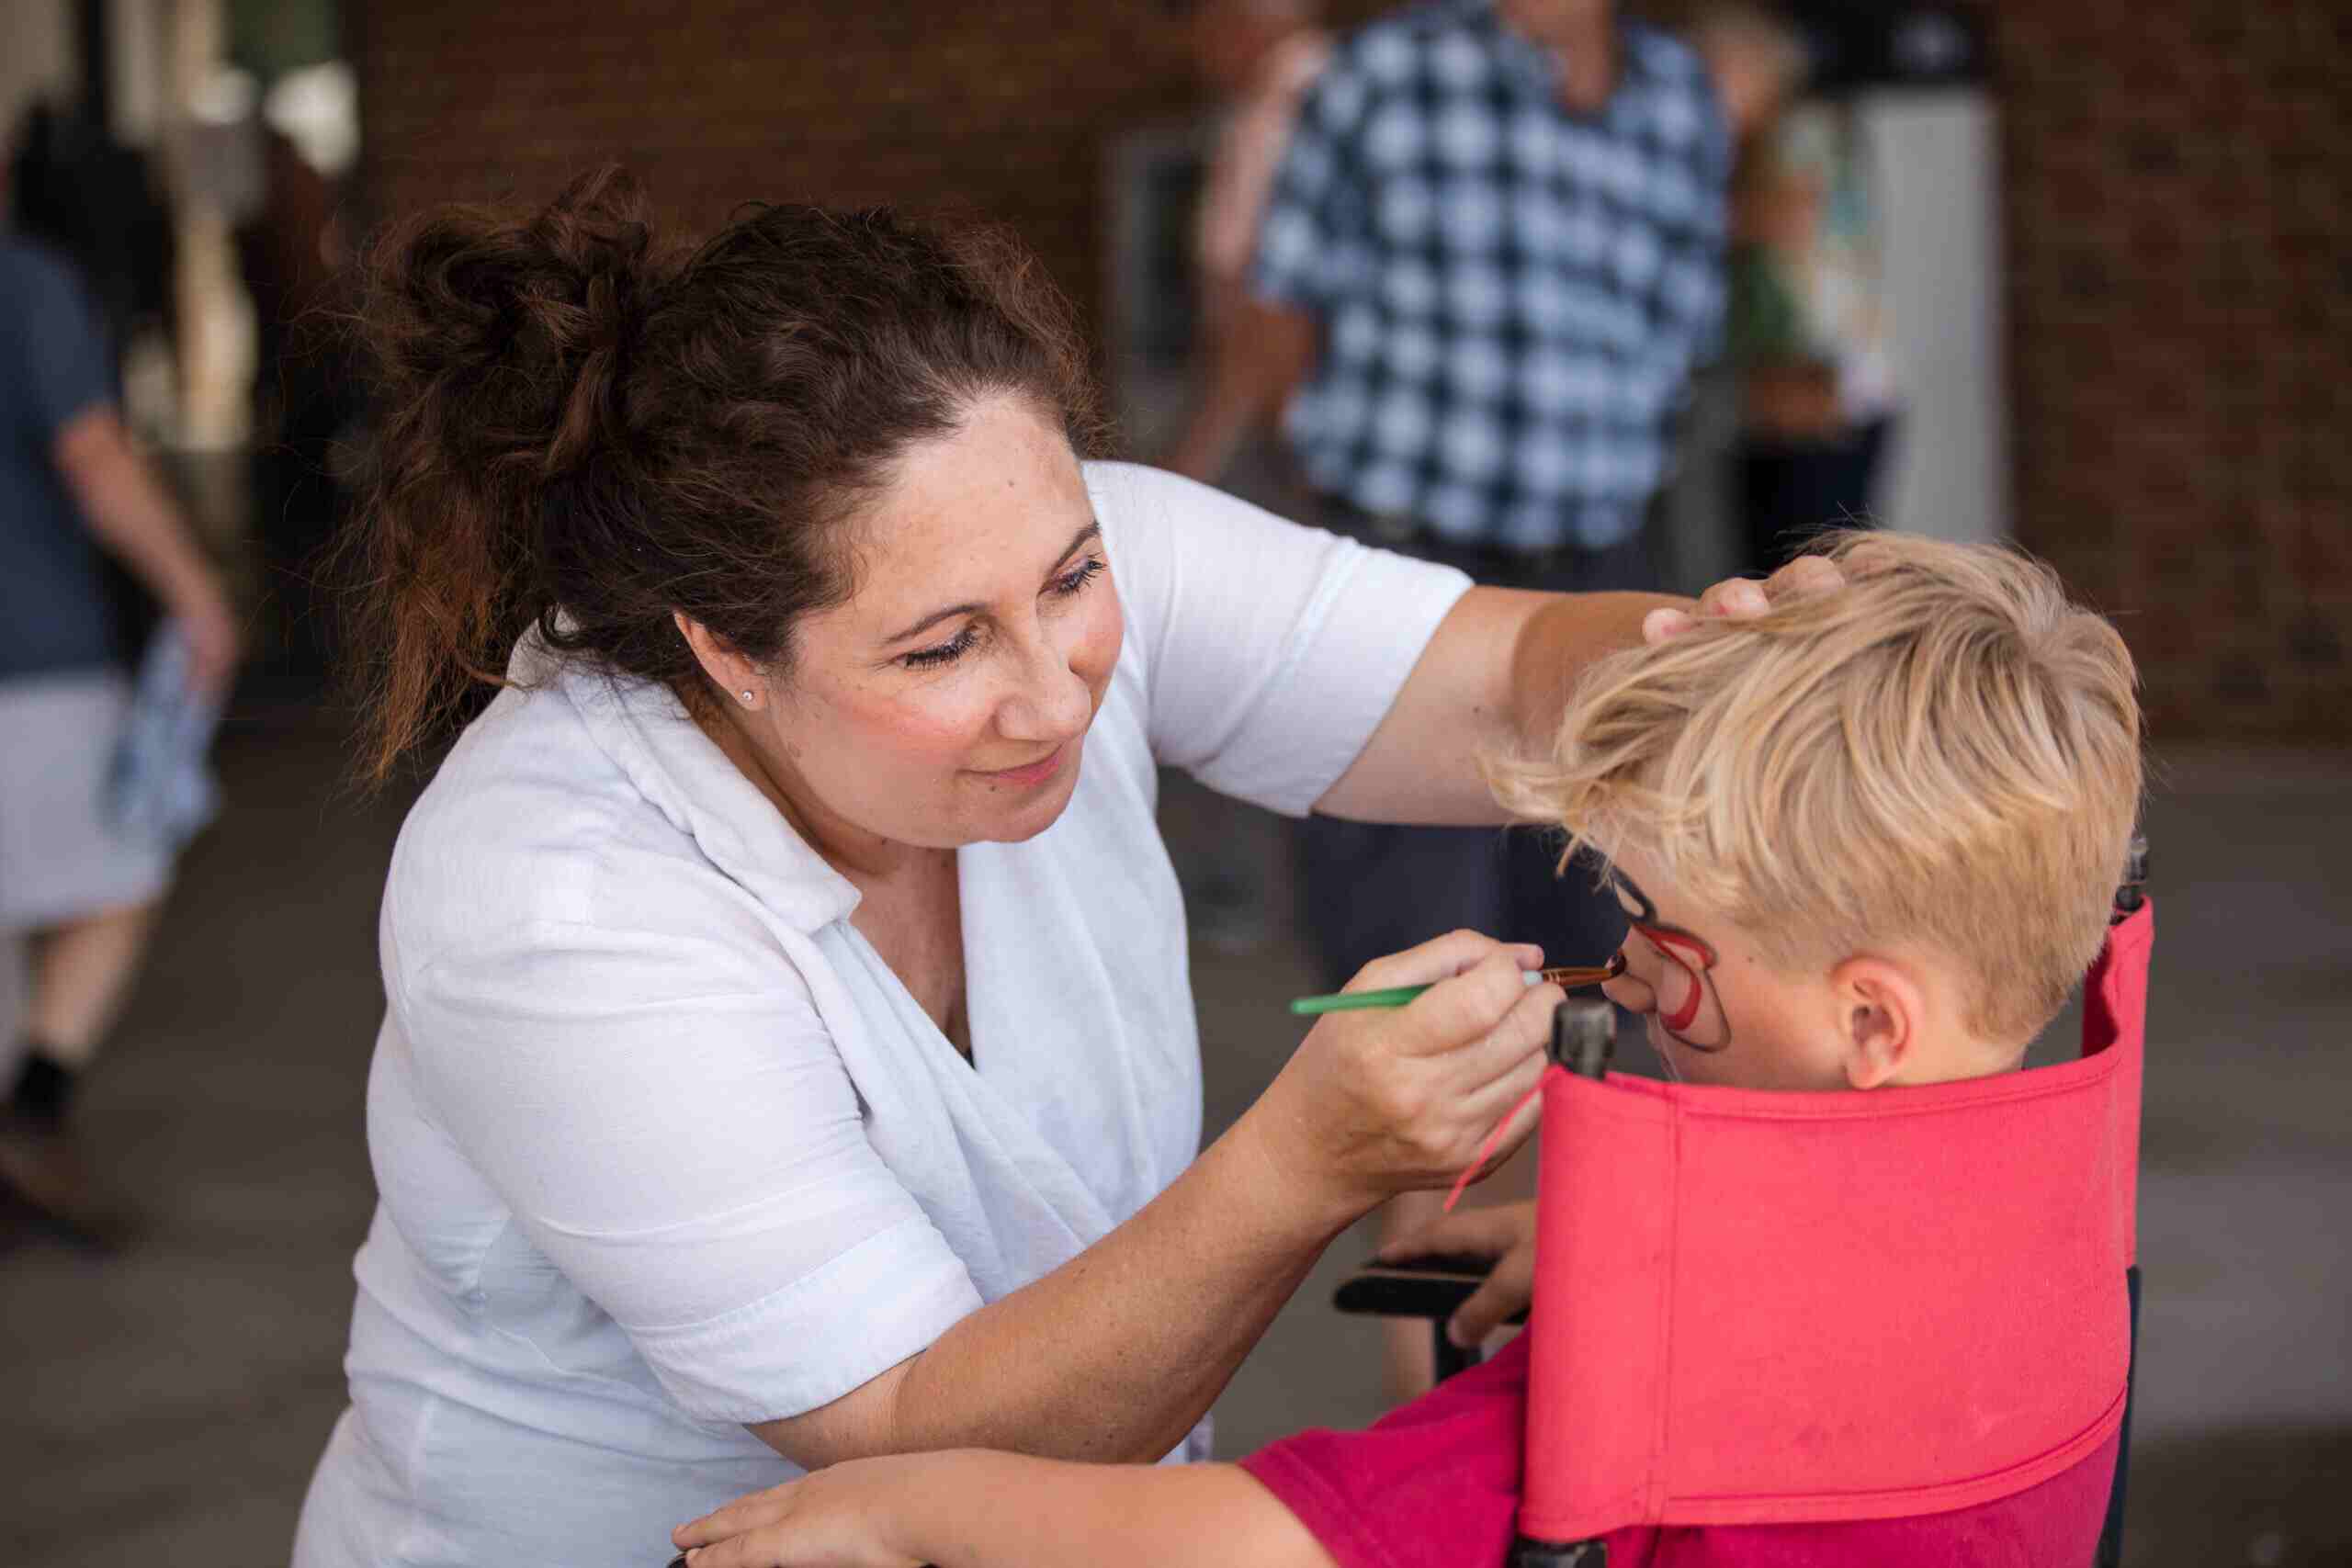 Woman painting kid's face